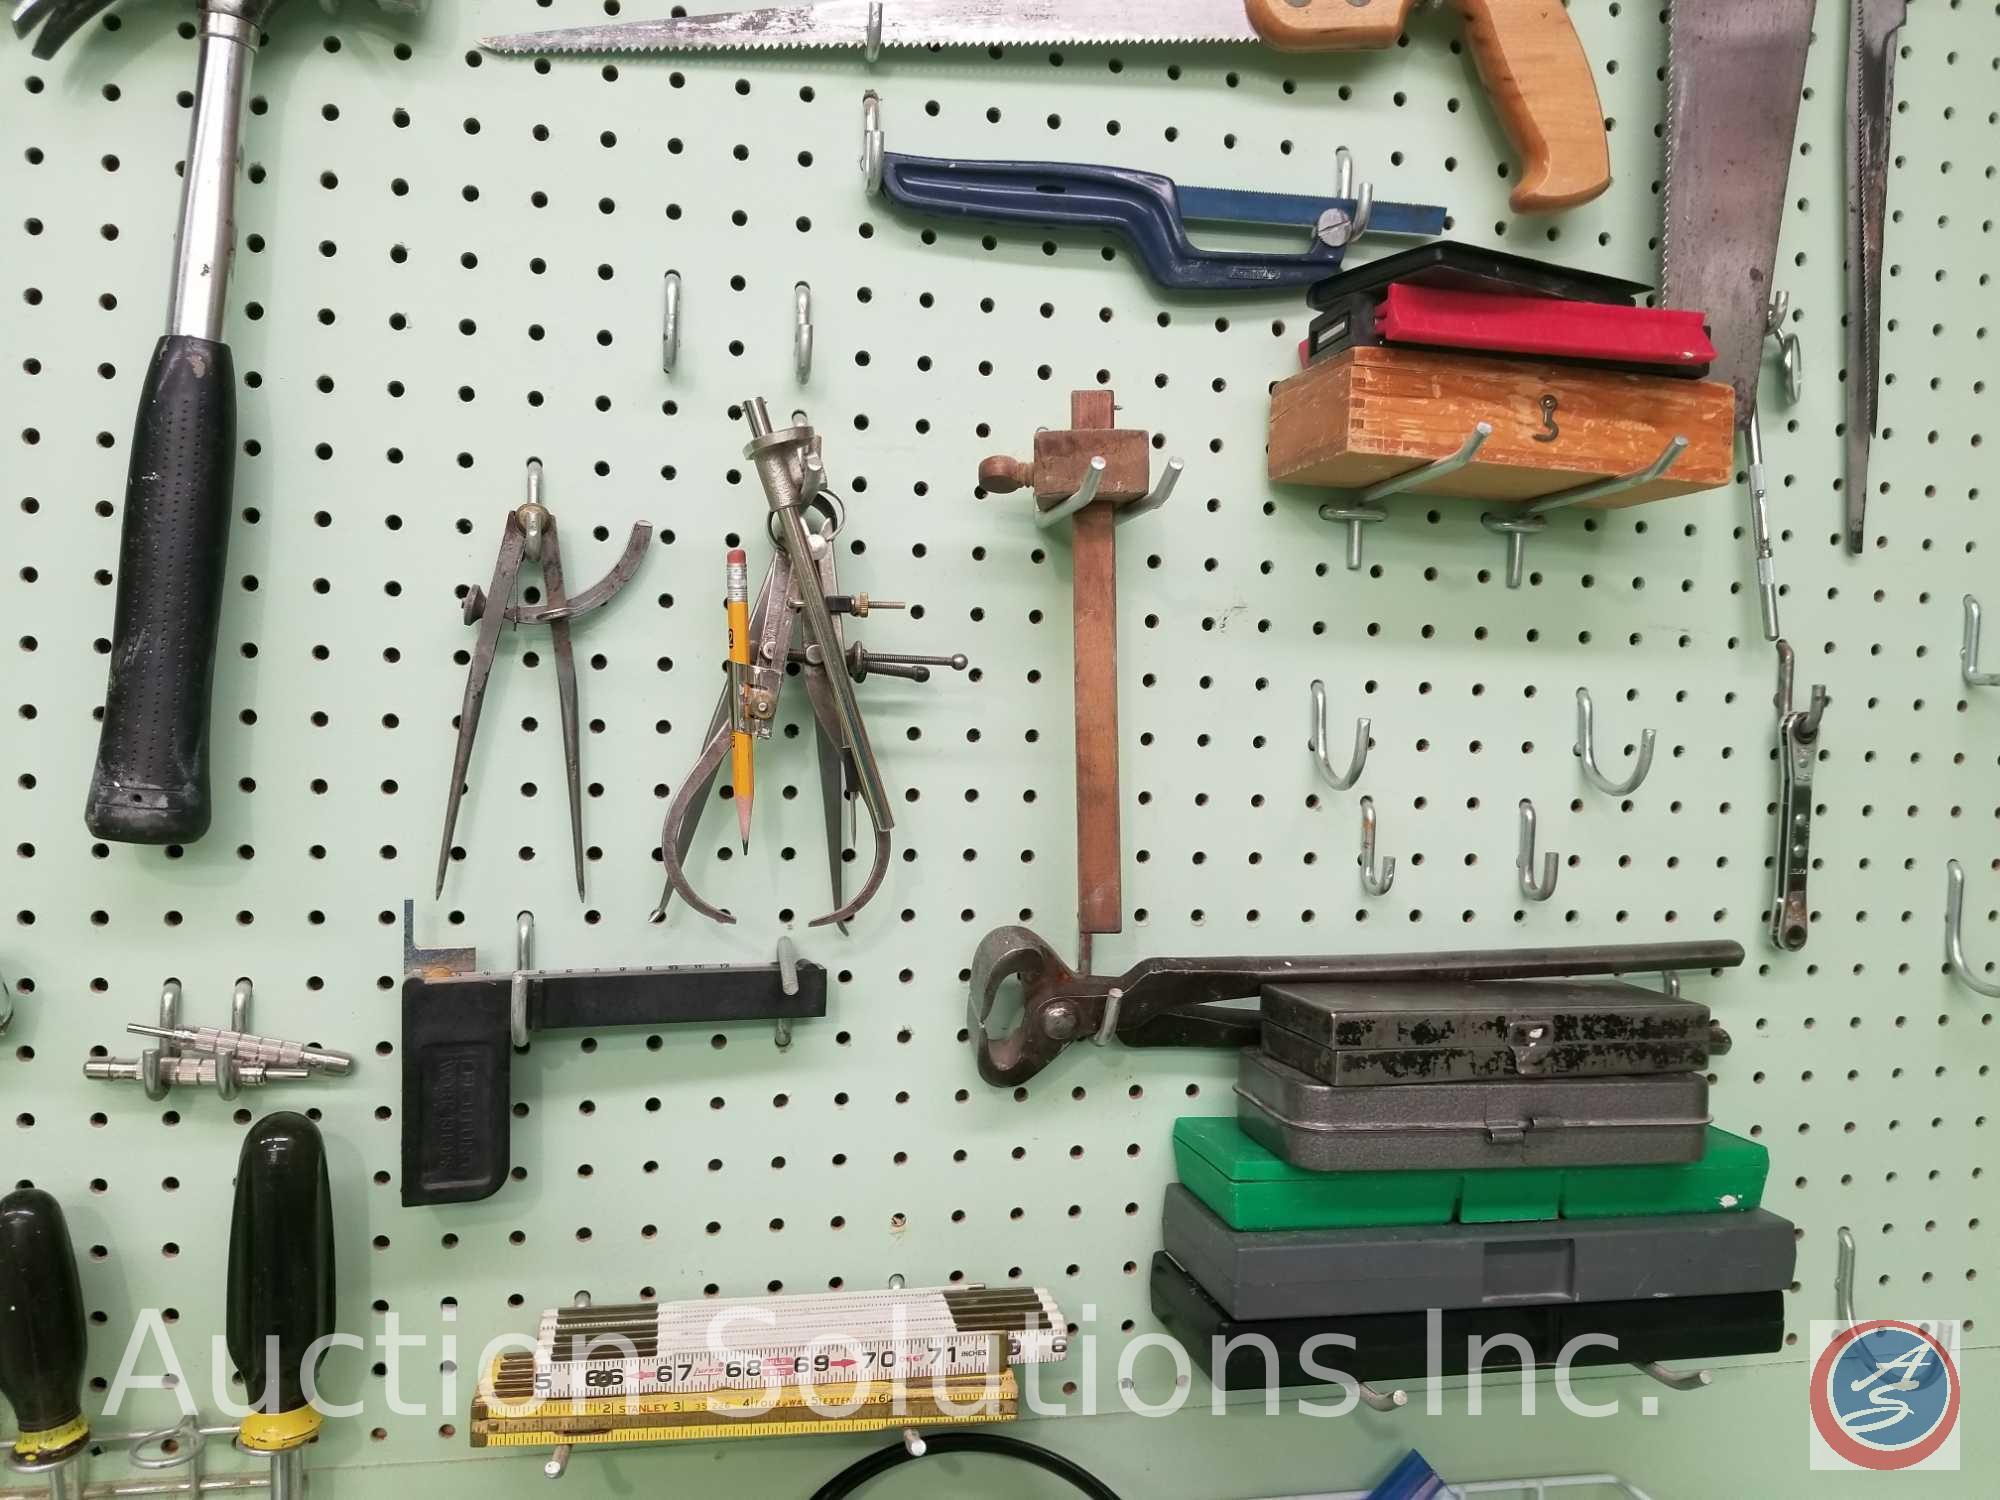 contents of pegboard to include assorted hammers, saws, levels and other hand tools (pegboard not